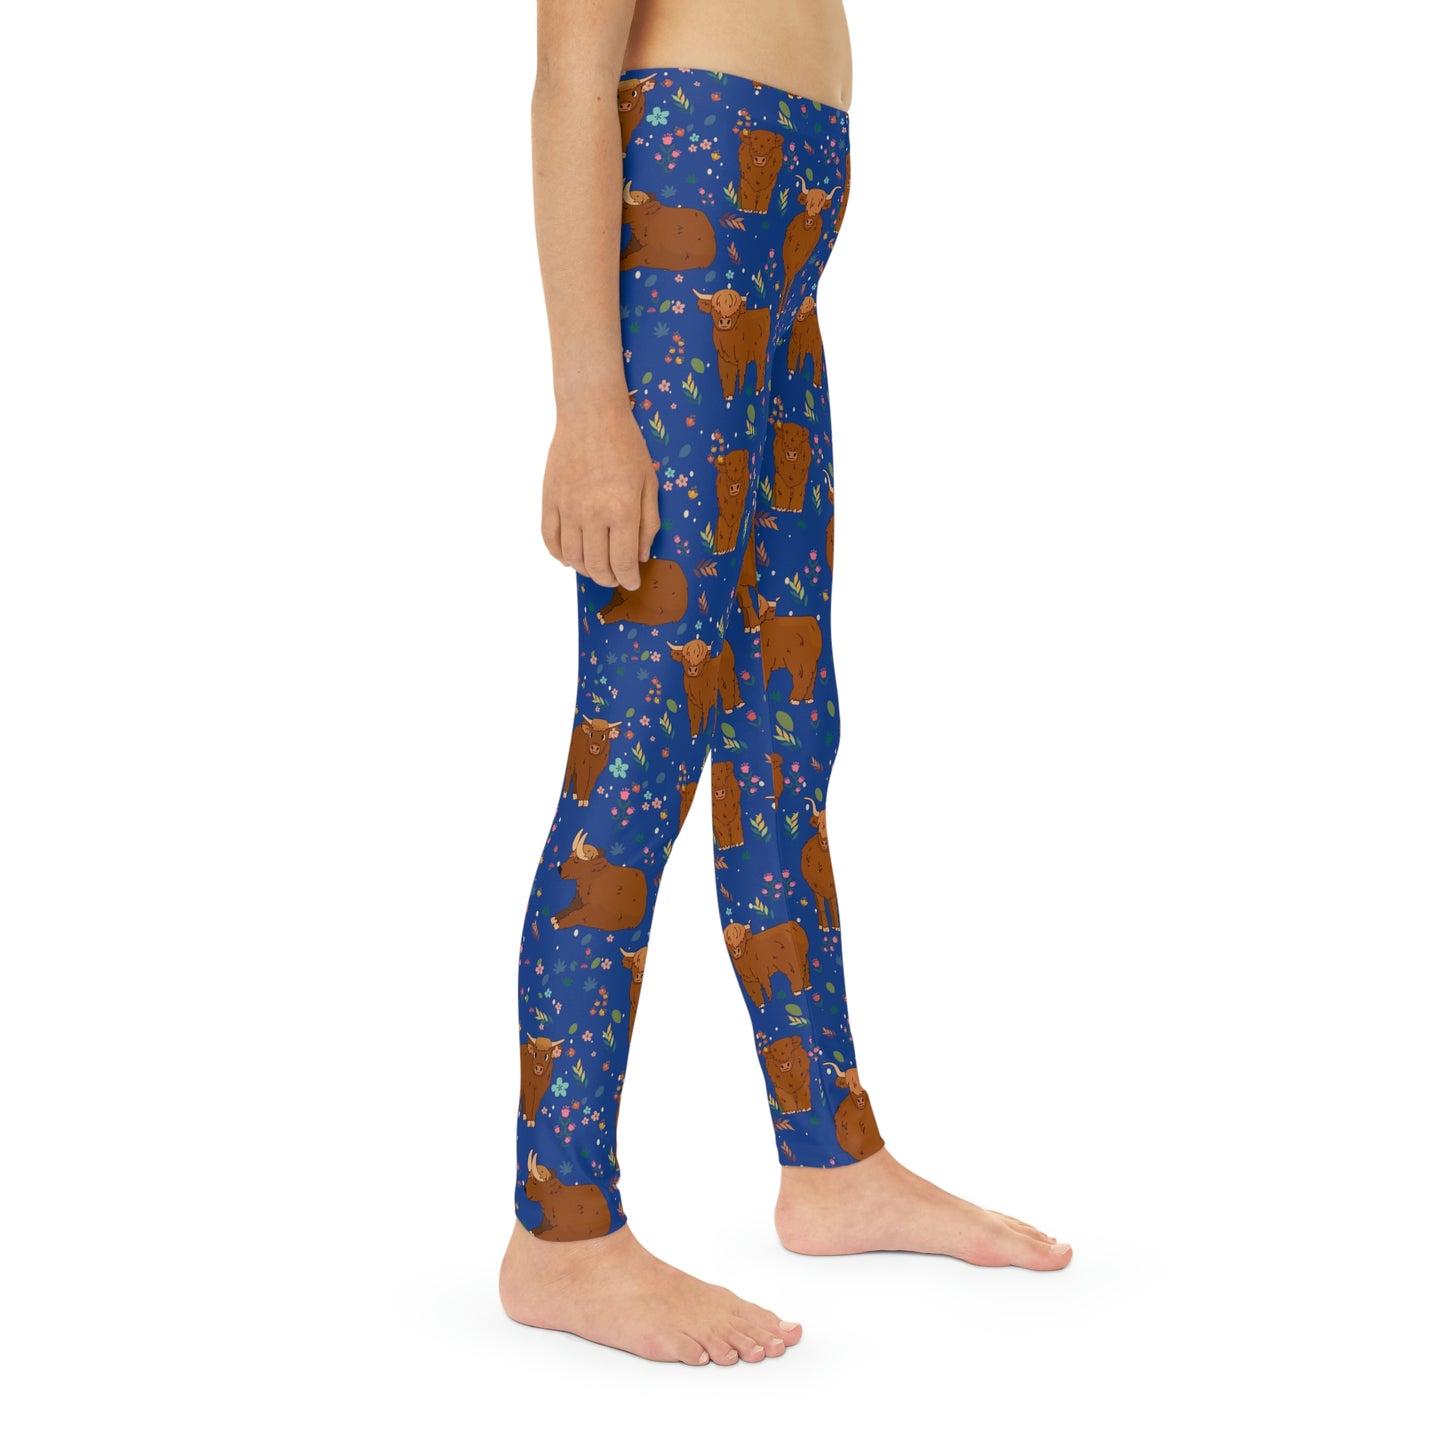 Highland Cows Cute  Farm Animal Kingdom Youth Leggings, One of a Kind Gift - Workout Activewear tights for kids, Granddaughter, Niece Christmas Gift